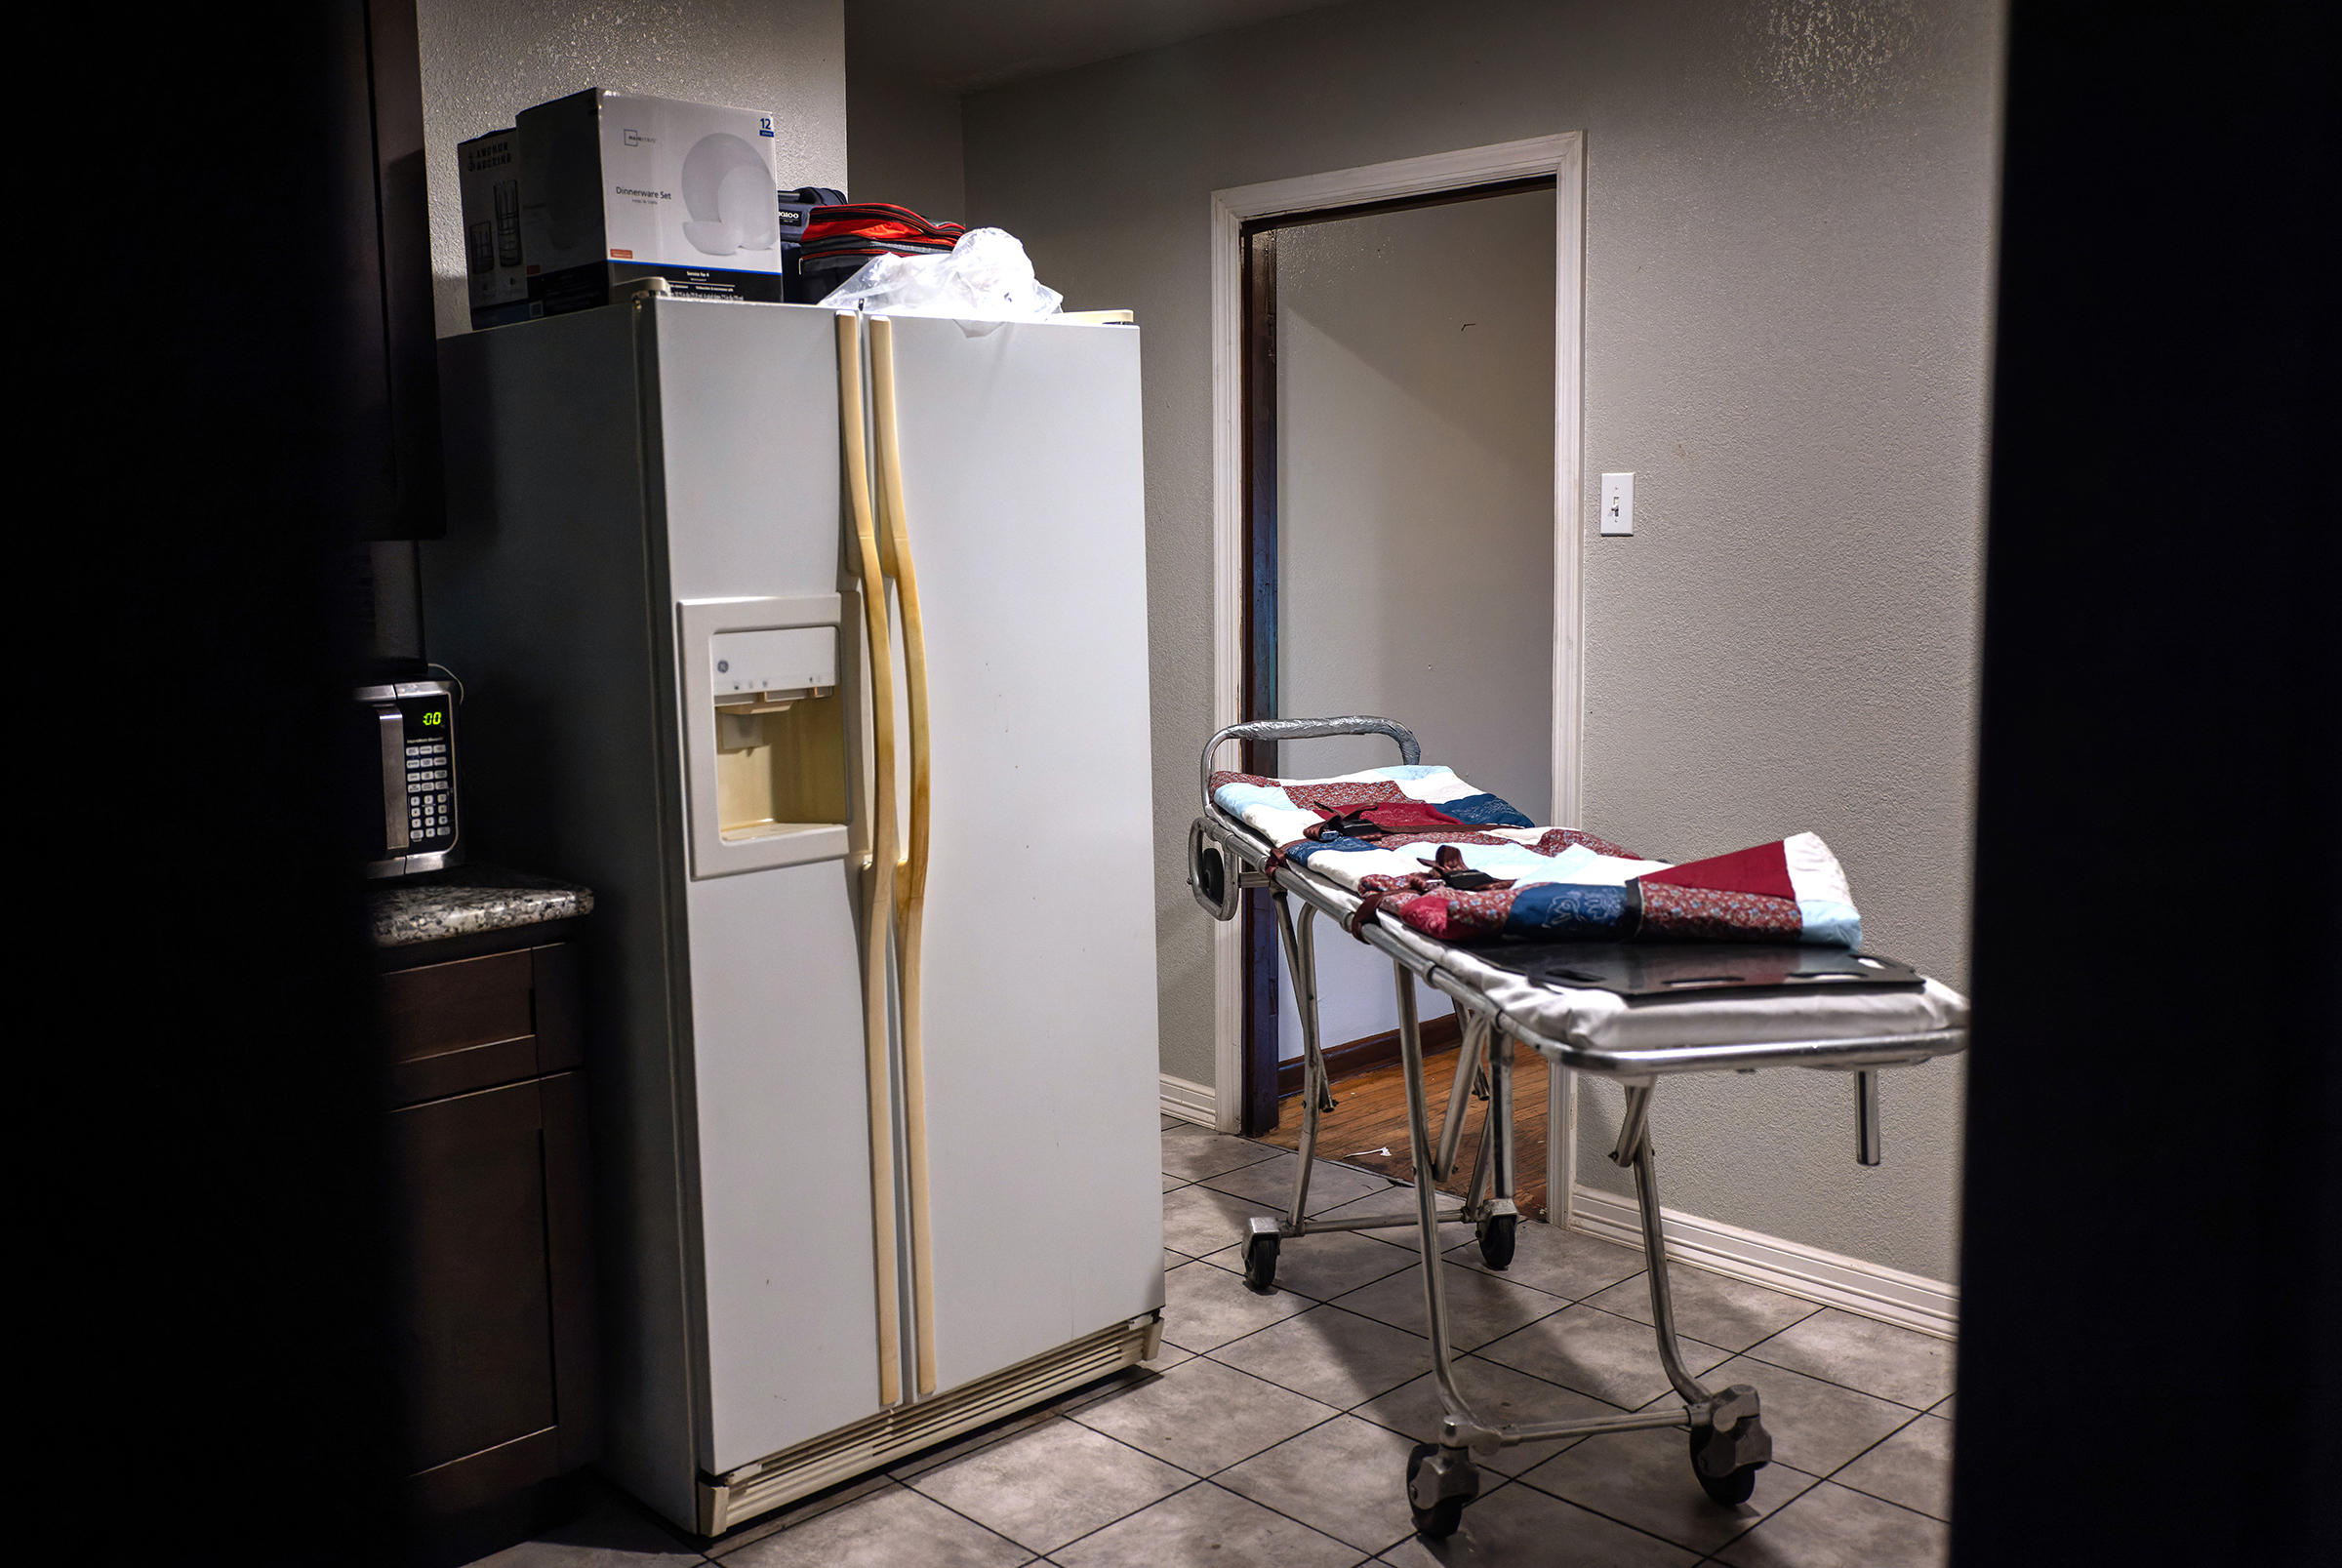 An empty stretcher waits in a kitchen as a funeral home worker prepares to transport the body of a 54-year-old woman who died from COVID-19 in her bed at home in Houston on Sept. 13. The woman's daughter said her mother had not been inoculated, citing fears of the vaccine.